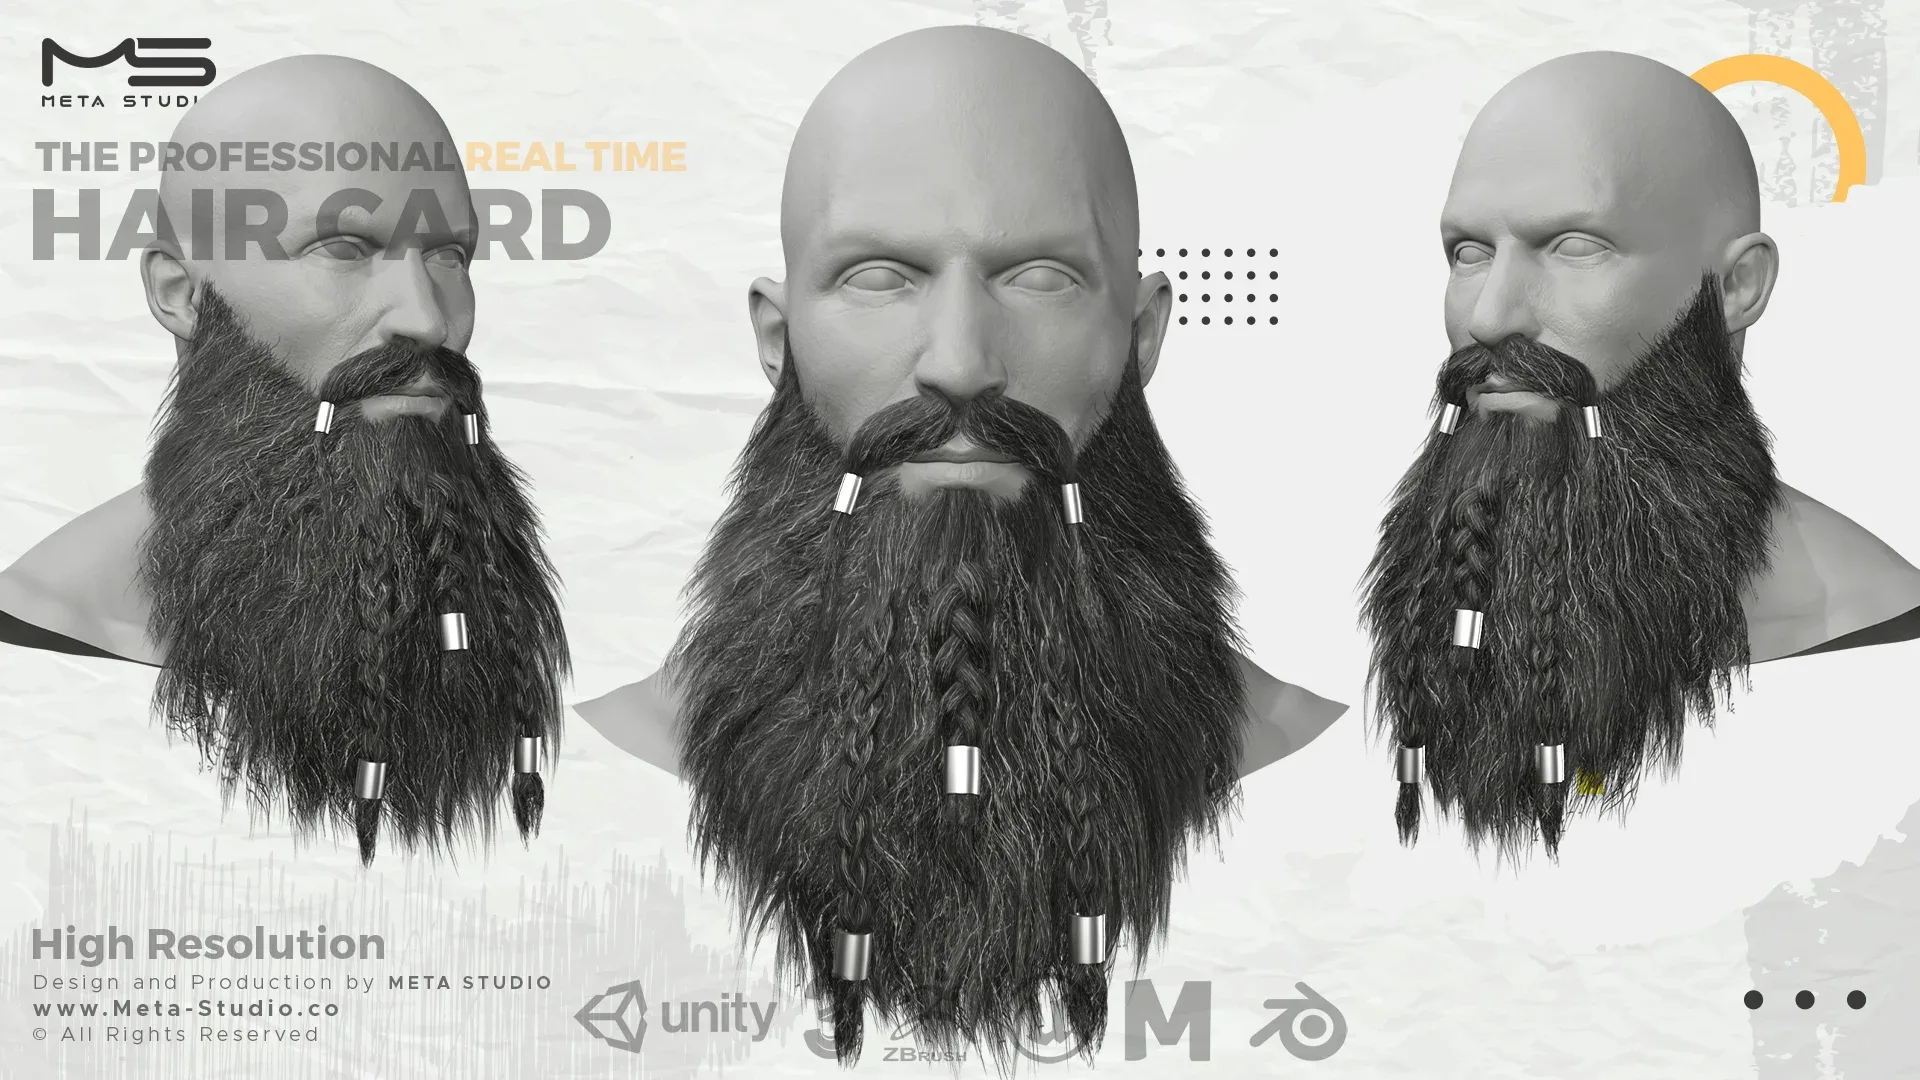 Beard and Mustache Part 2 - Professional Realtime Hair card